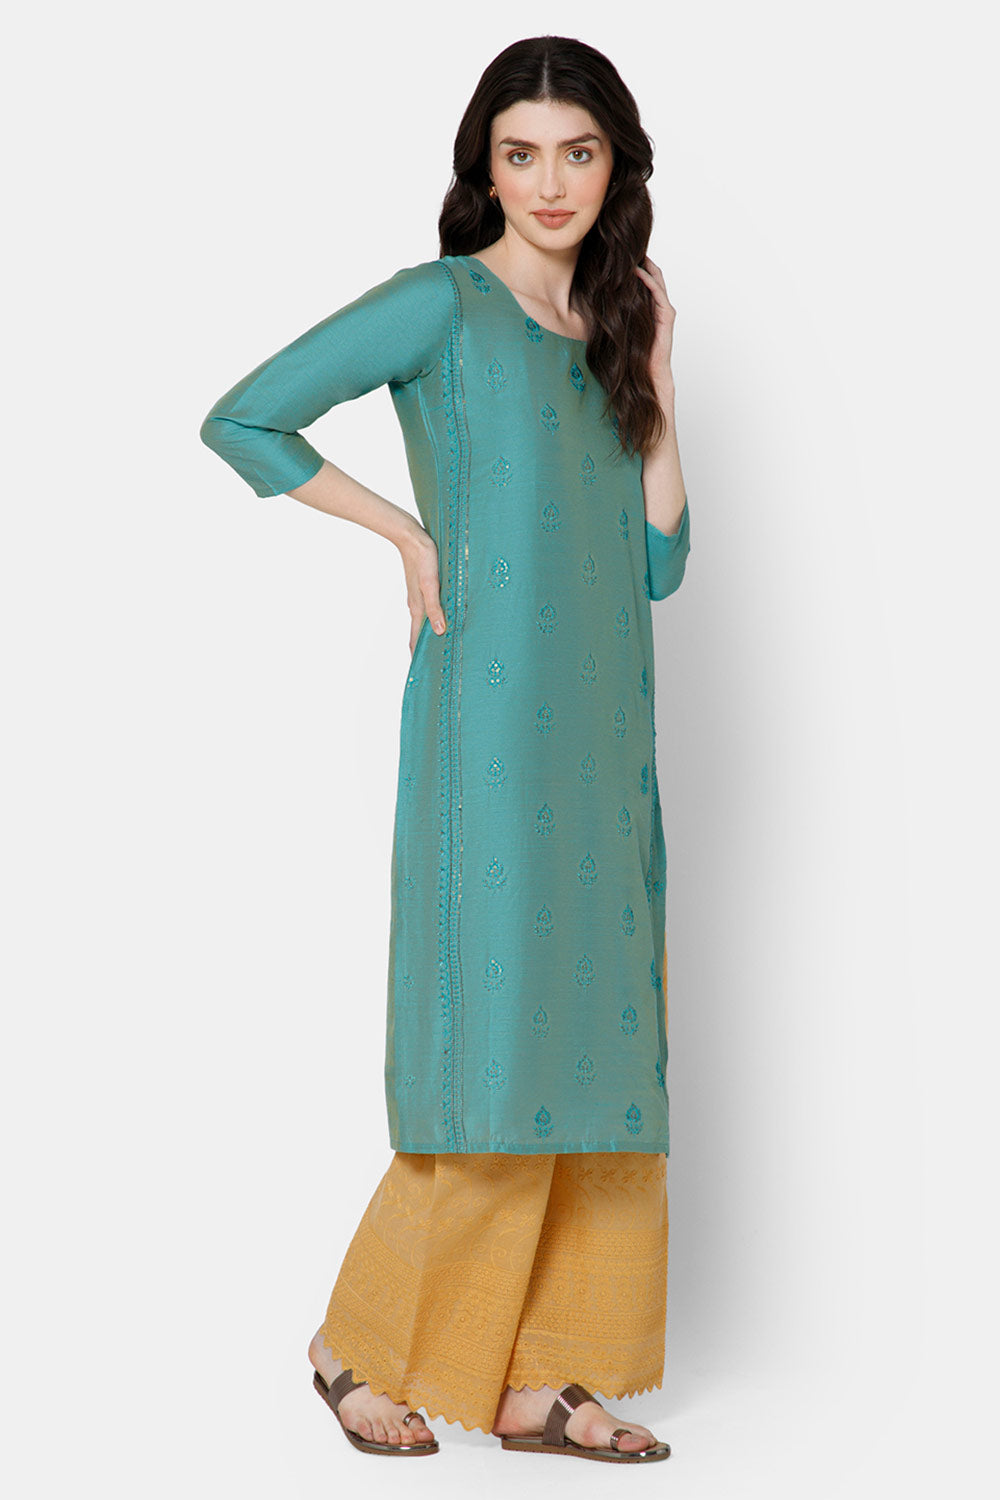 Mythri Women's Ethnic wear with Sequins Embroidery - Sea Green - E038